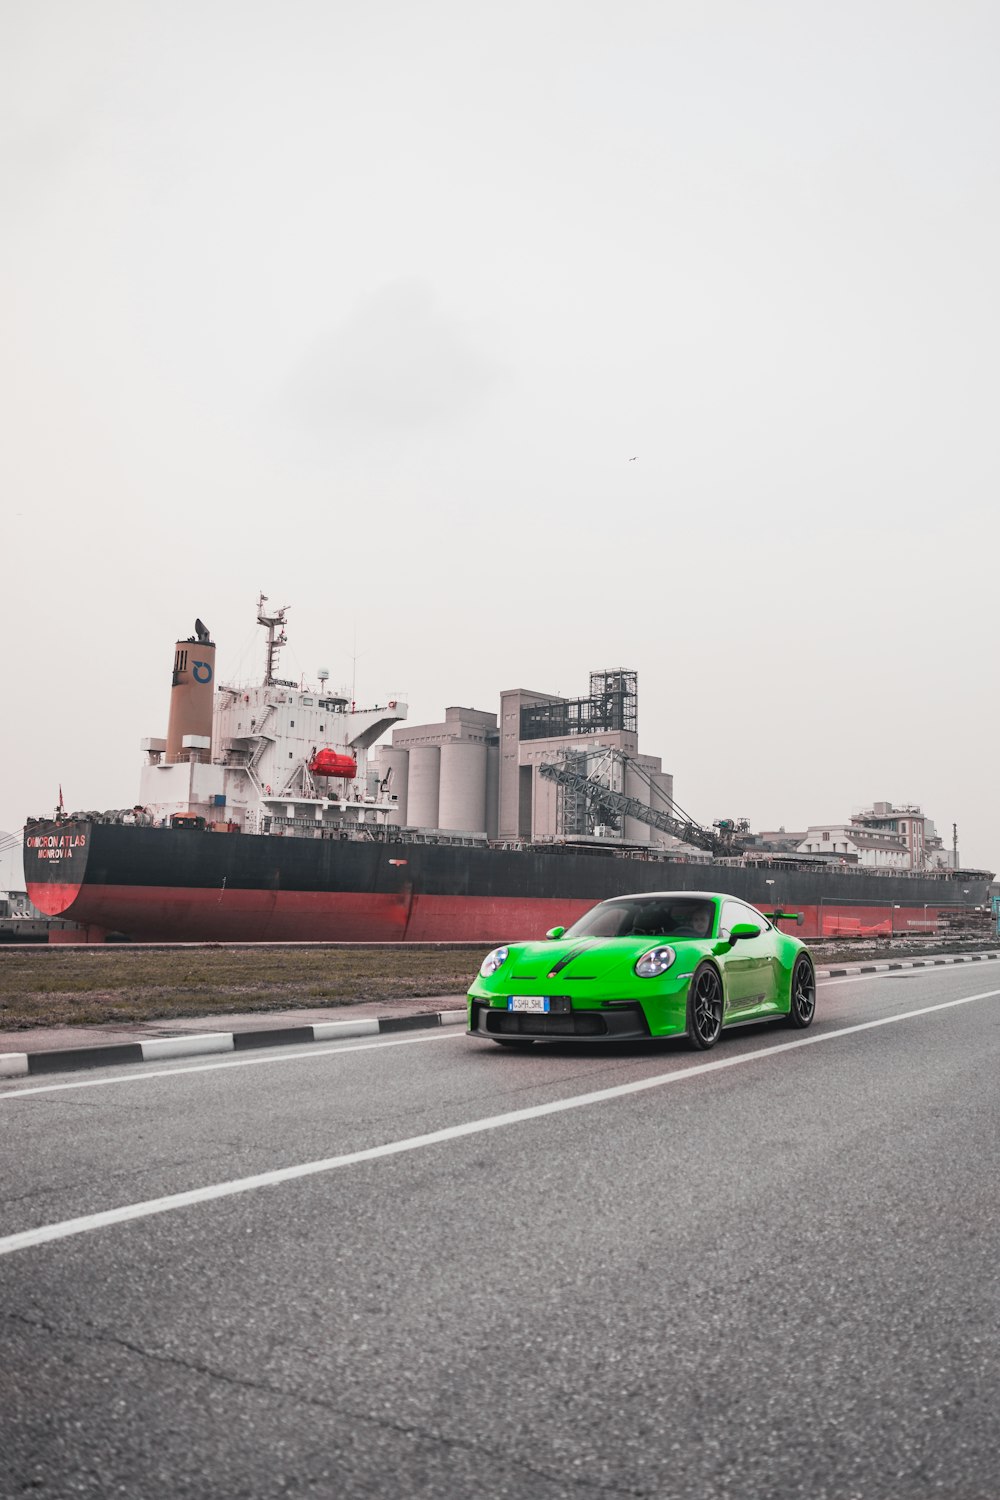 a green sports car driving down a road next to a large ship